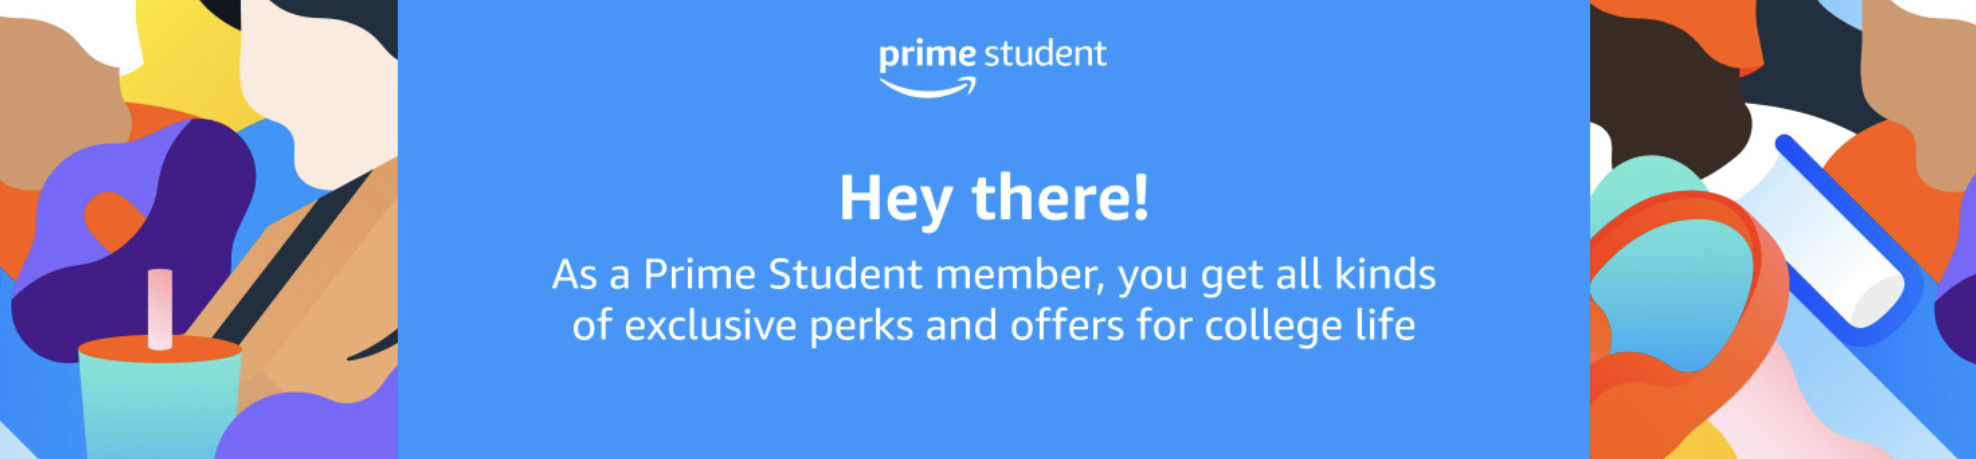 A banner showing Amazon Prime offering for students